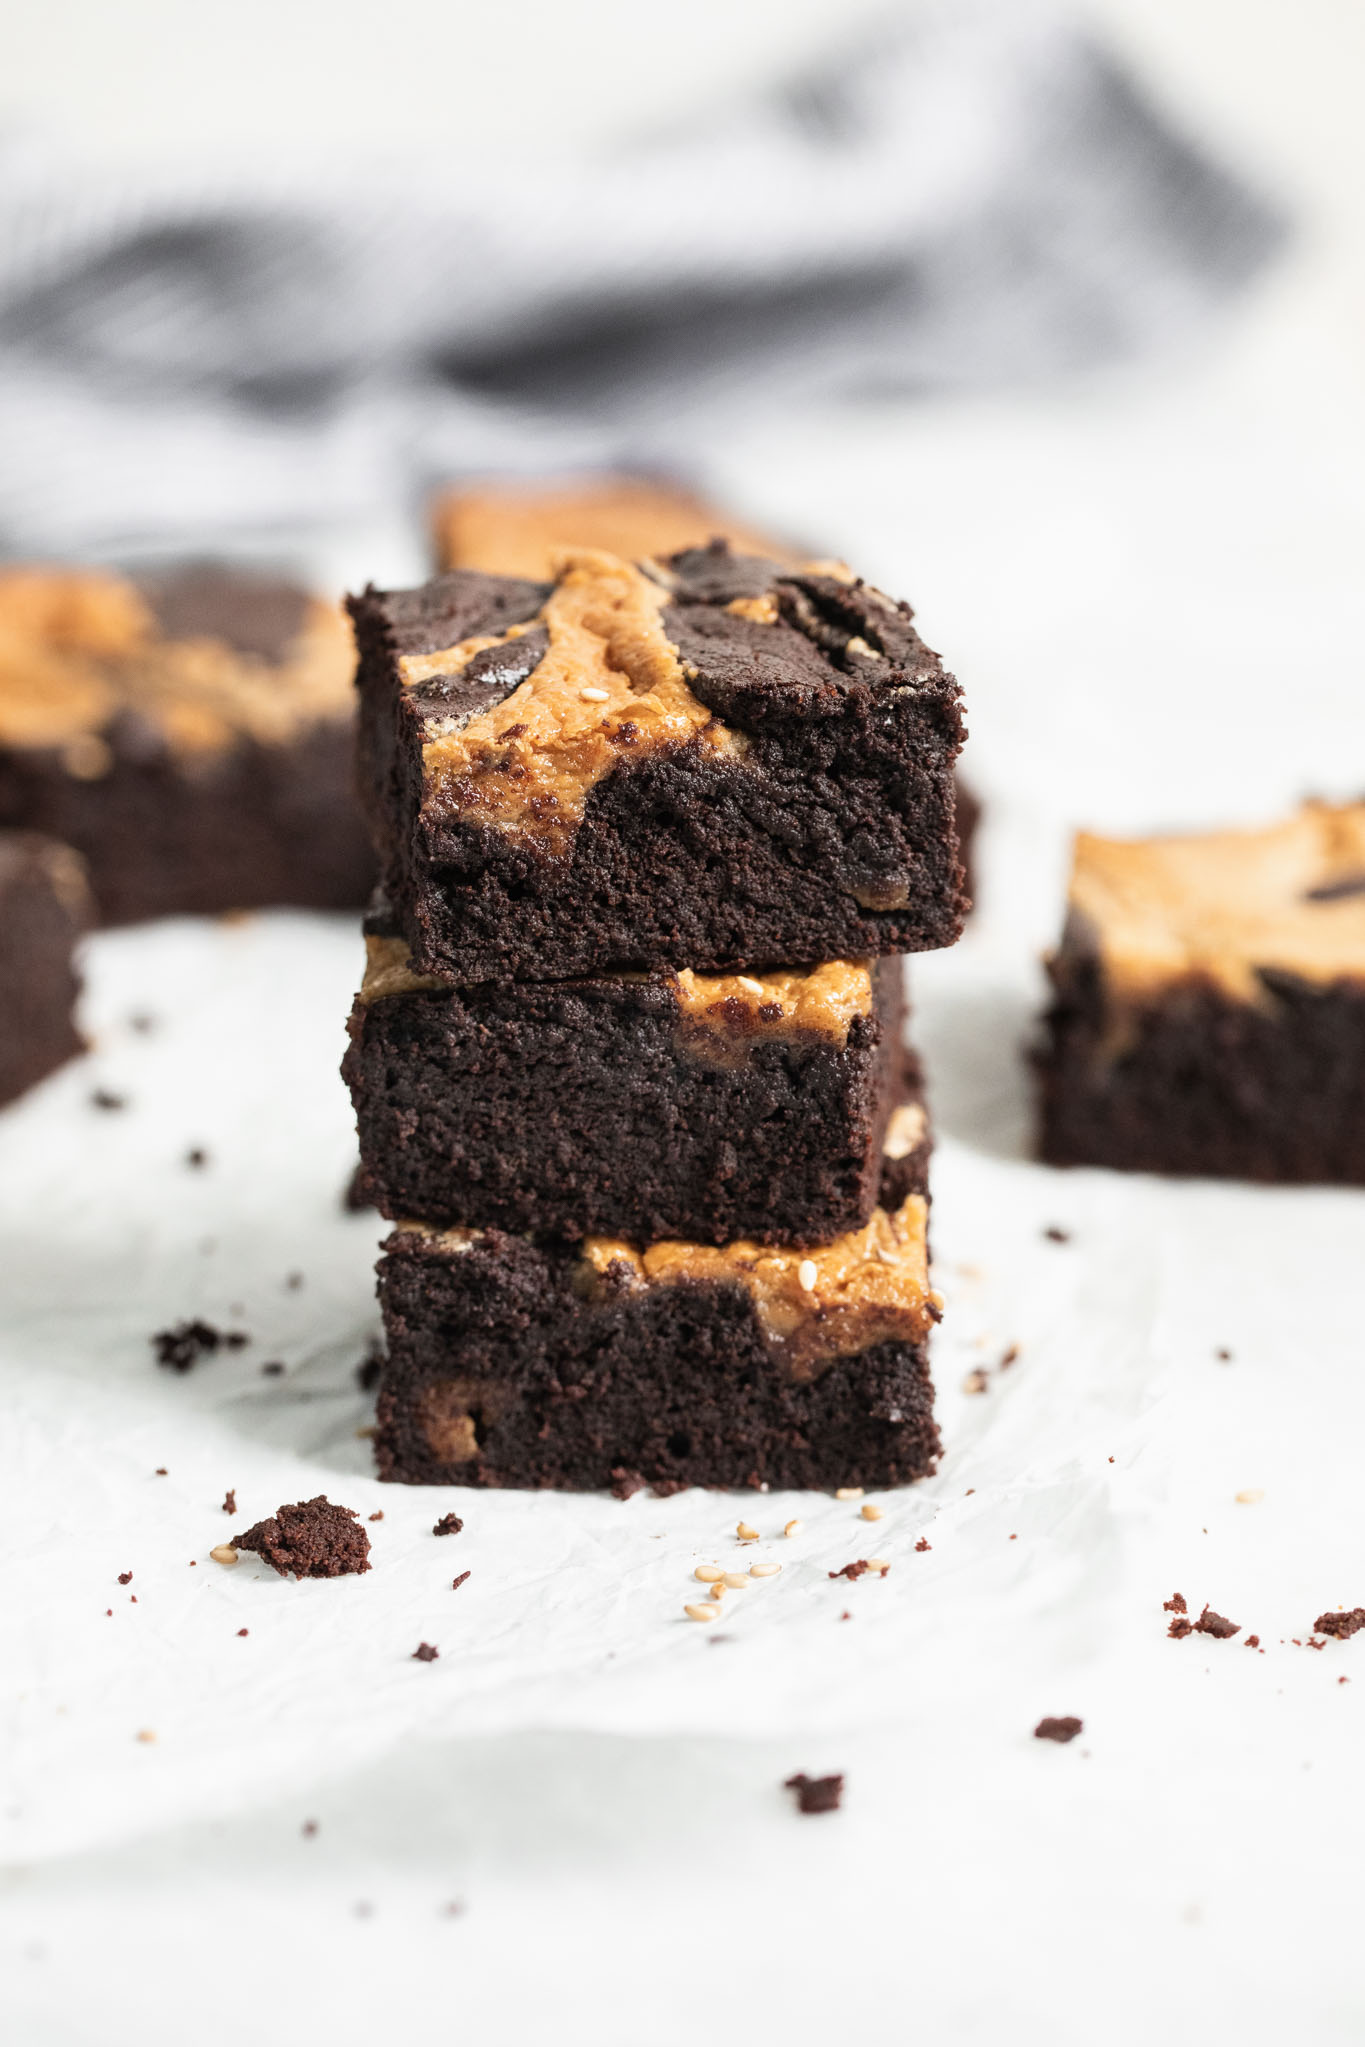 Introducing Halva Brownies AKA thick fudgy brownies swirled with ribbons of halva, my favorite middle eastern confection. Think tahini brownies, but better!